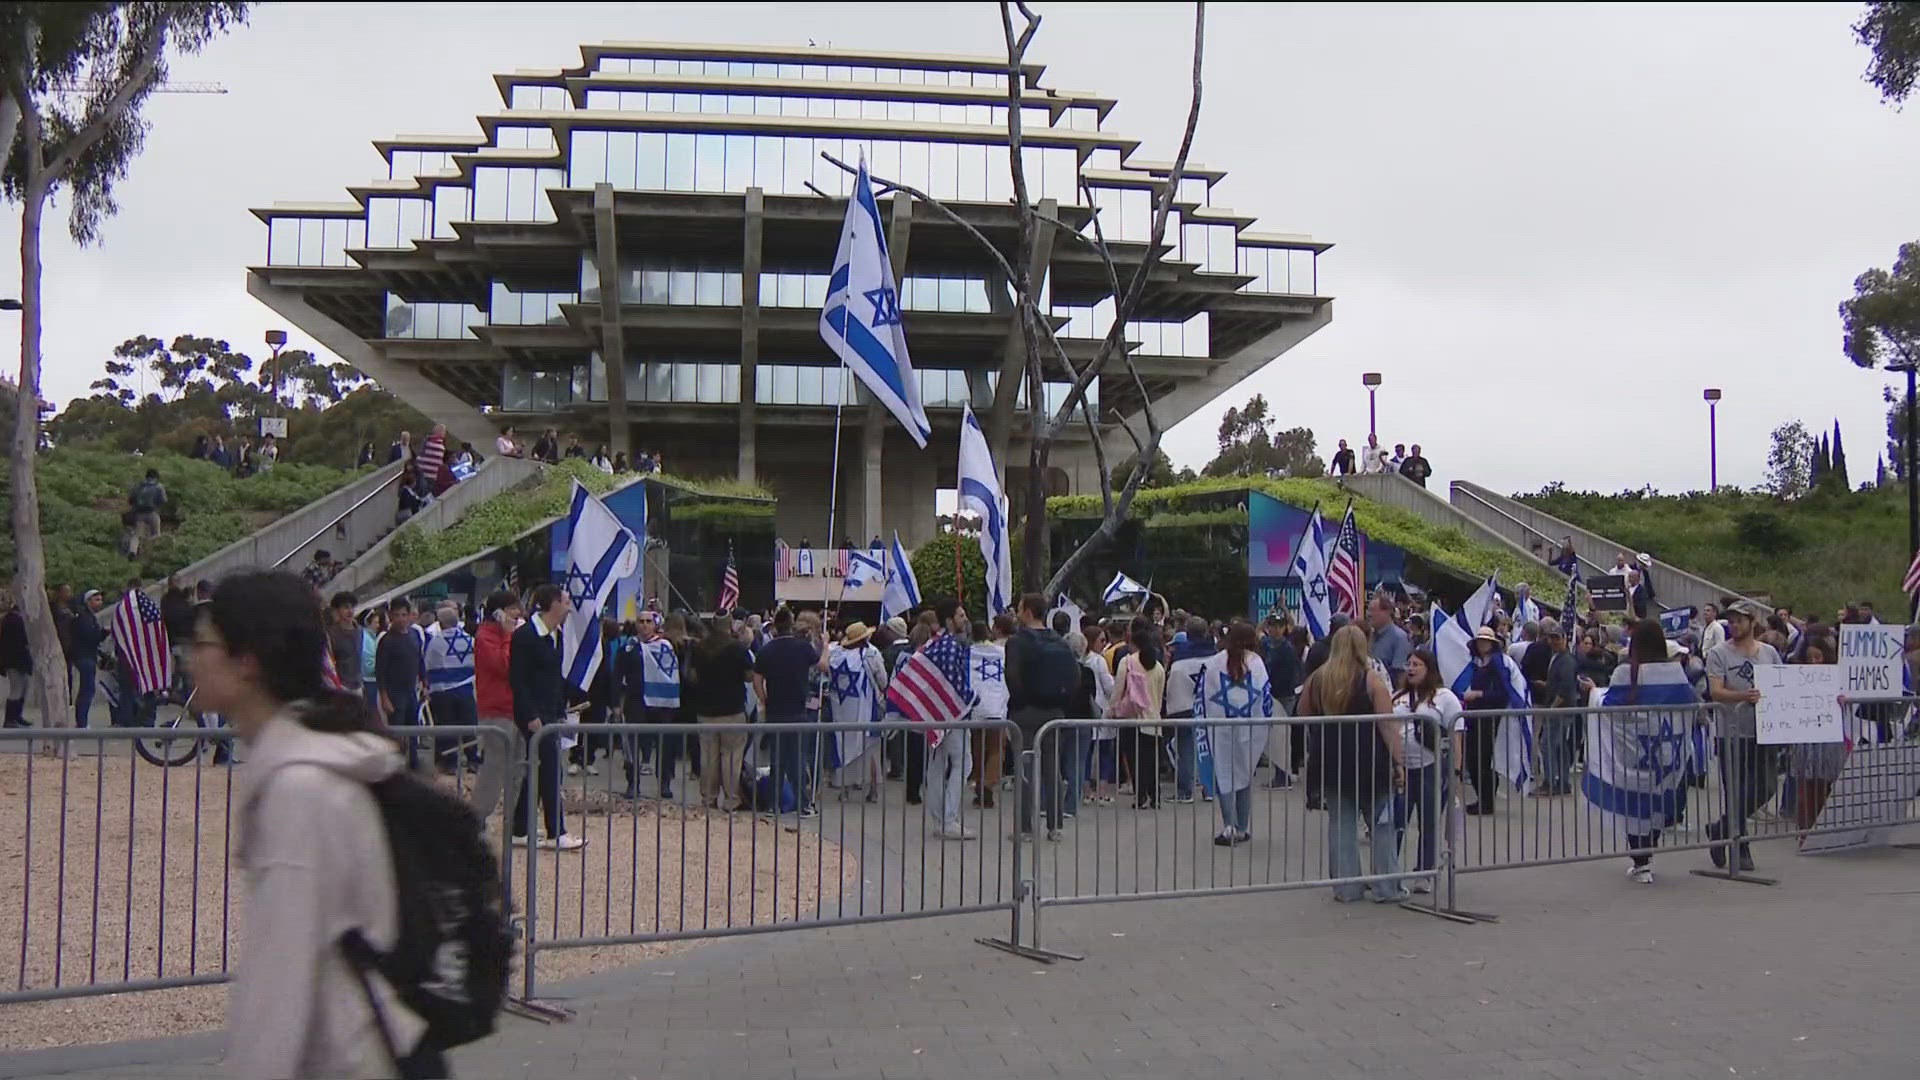 Pro-Israel and pro-Palestinian groups spoke out at UC San Diego just before the son of a Hamas co-founder took the stage to speak on campus.